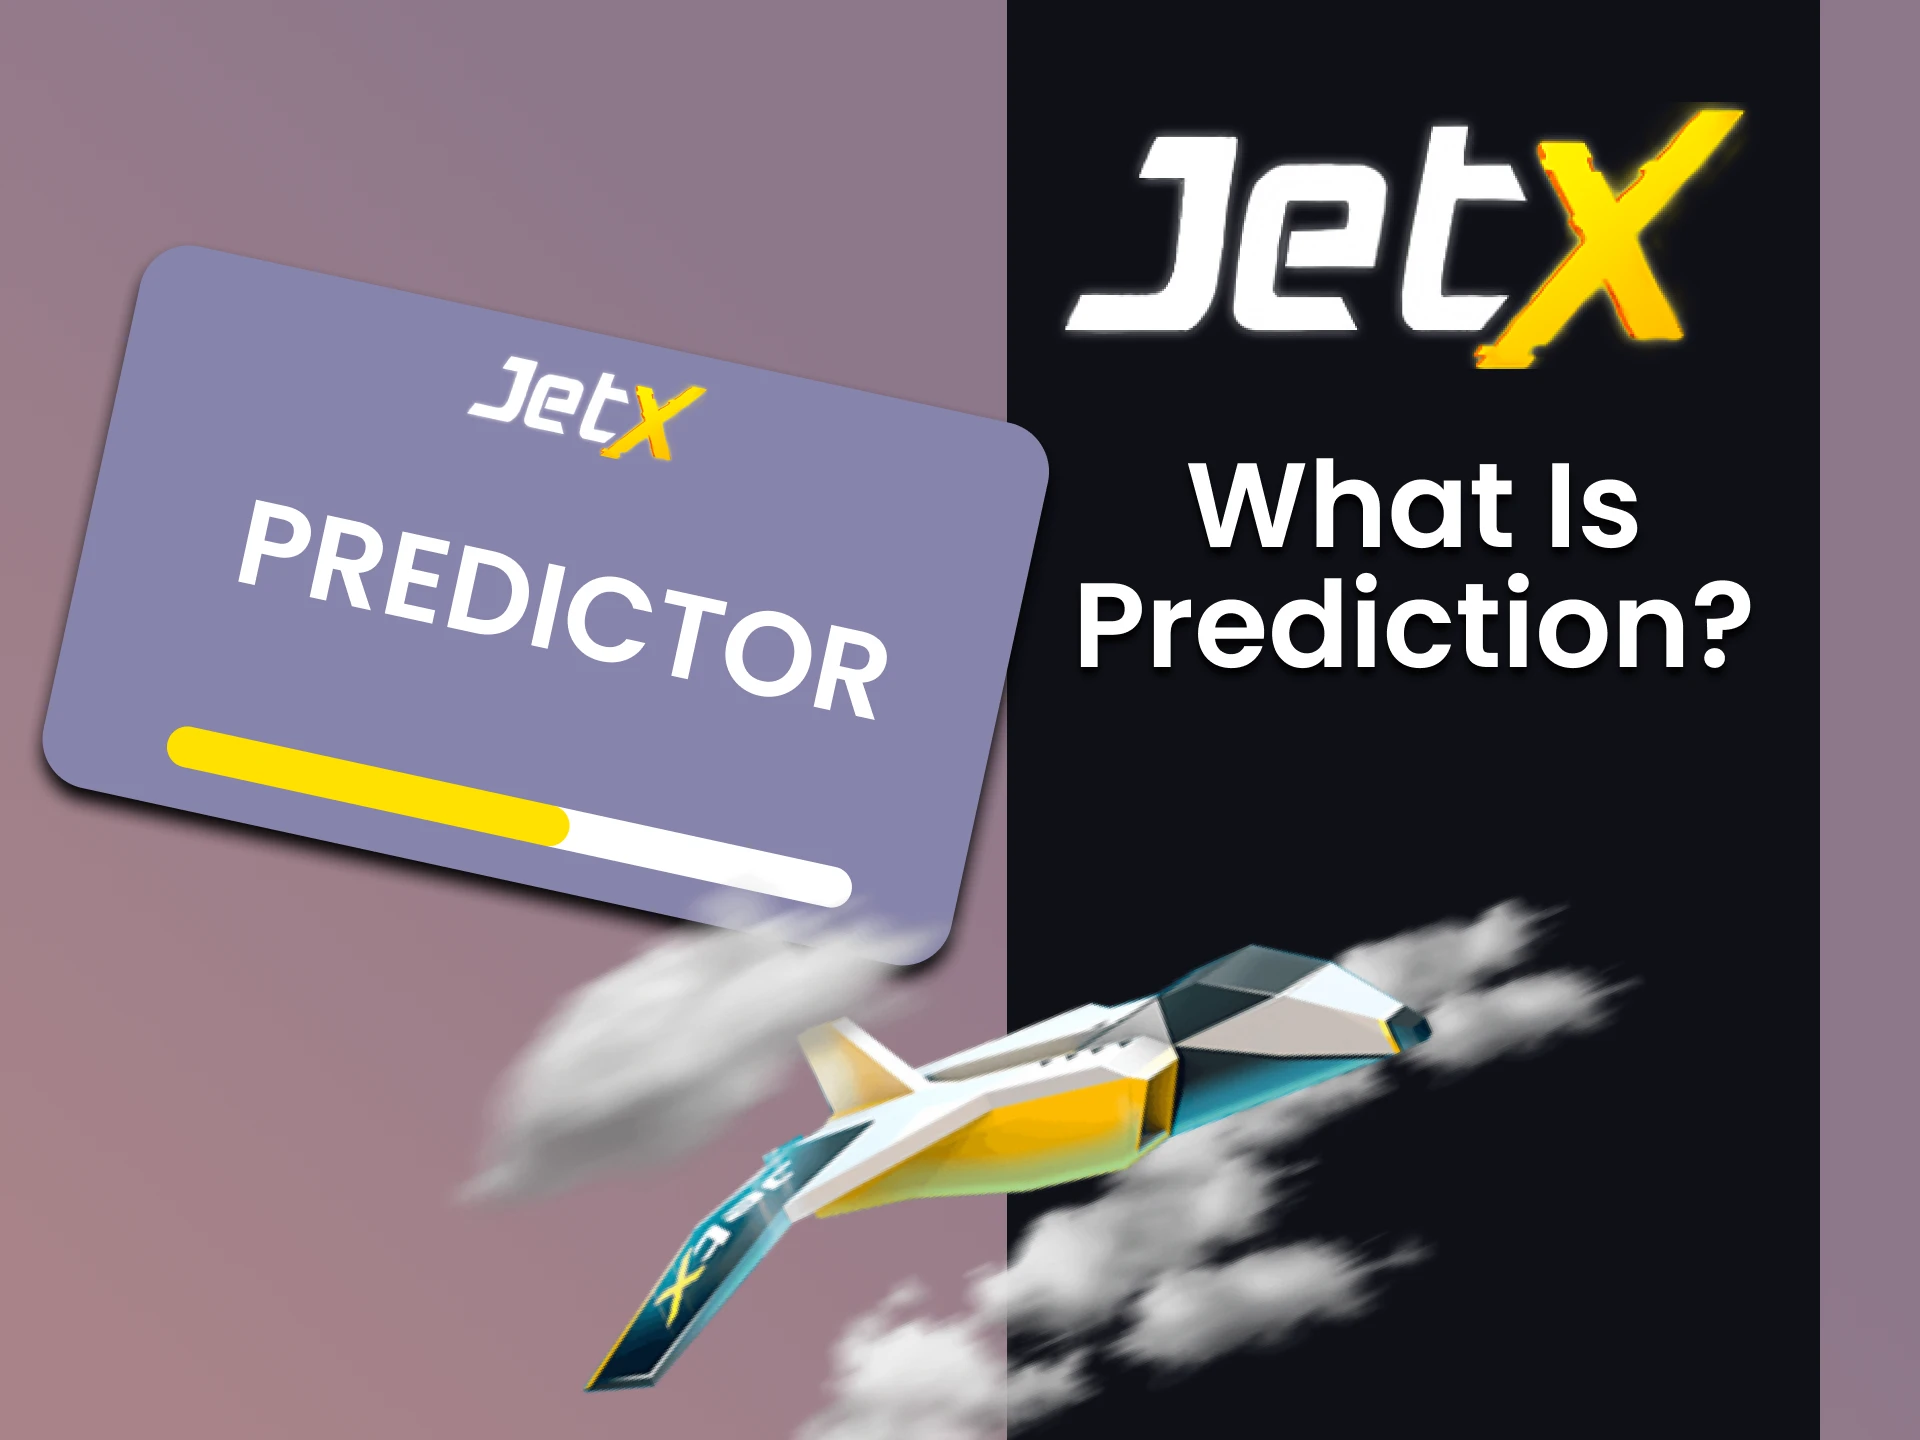 Learn about third-party software for the JetX game.